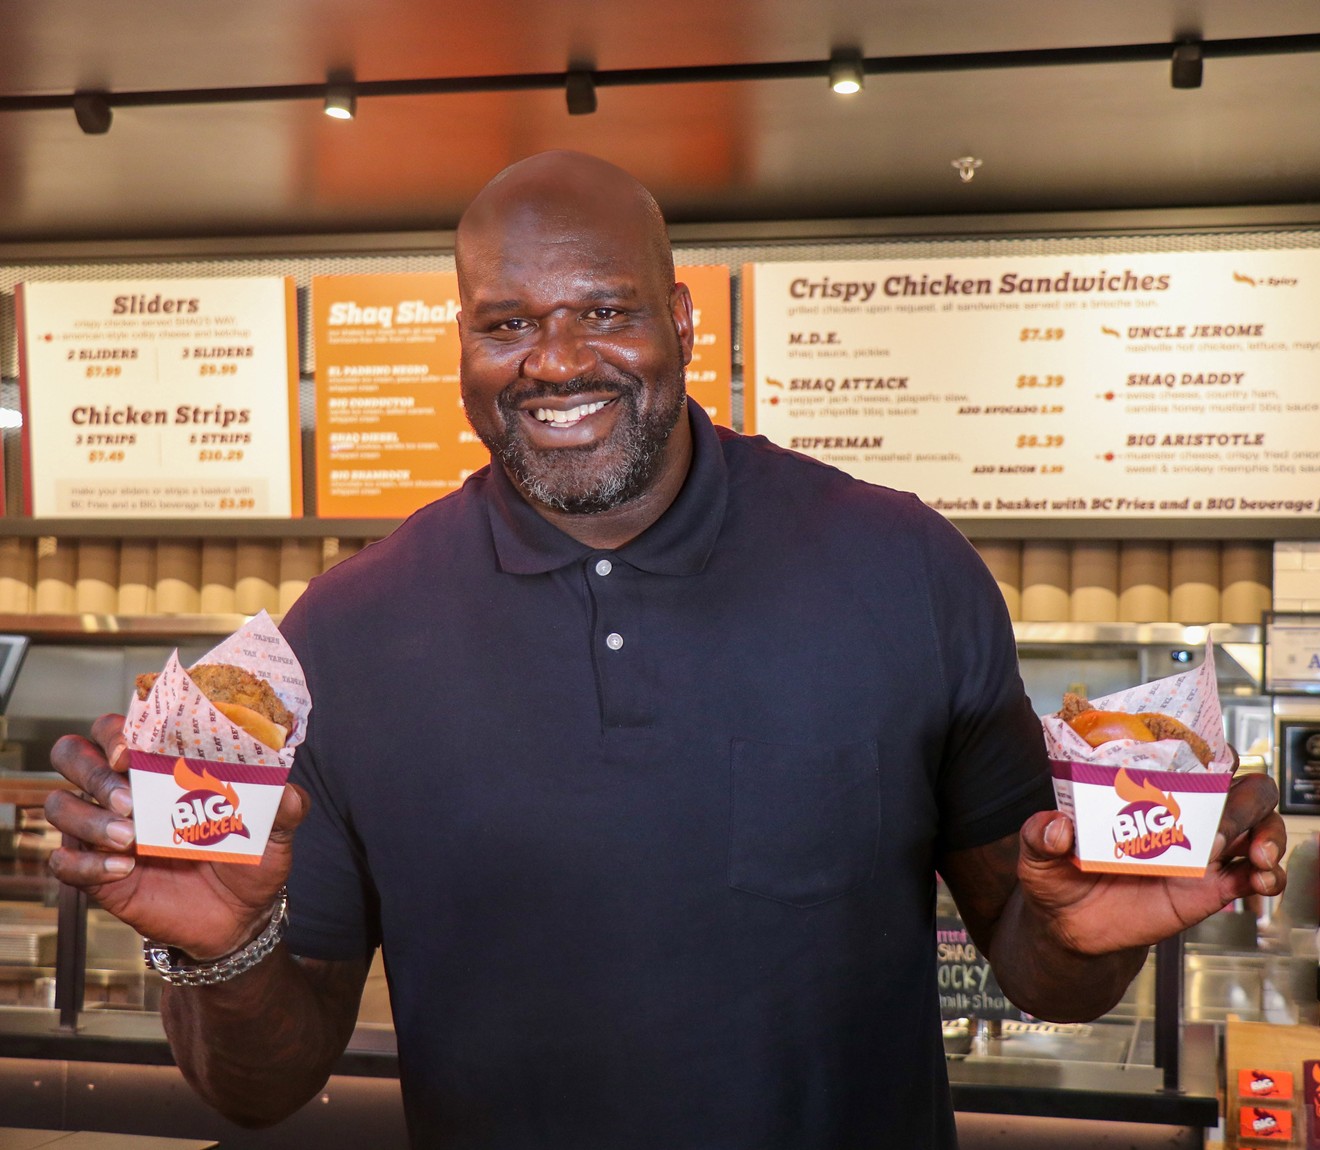 Shaquille O'Neal has all the chicken feels.